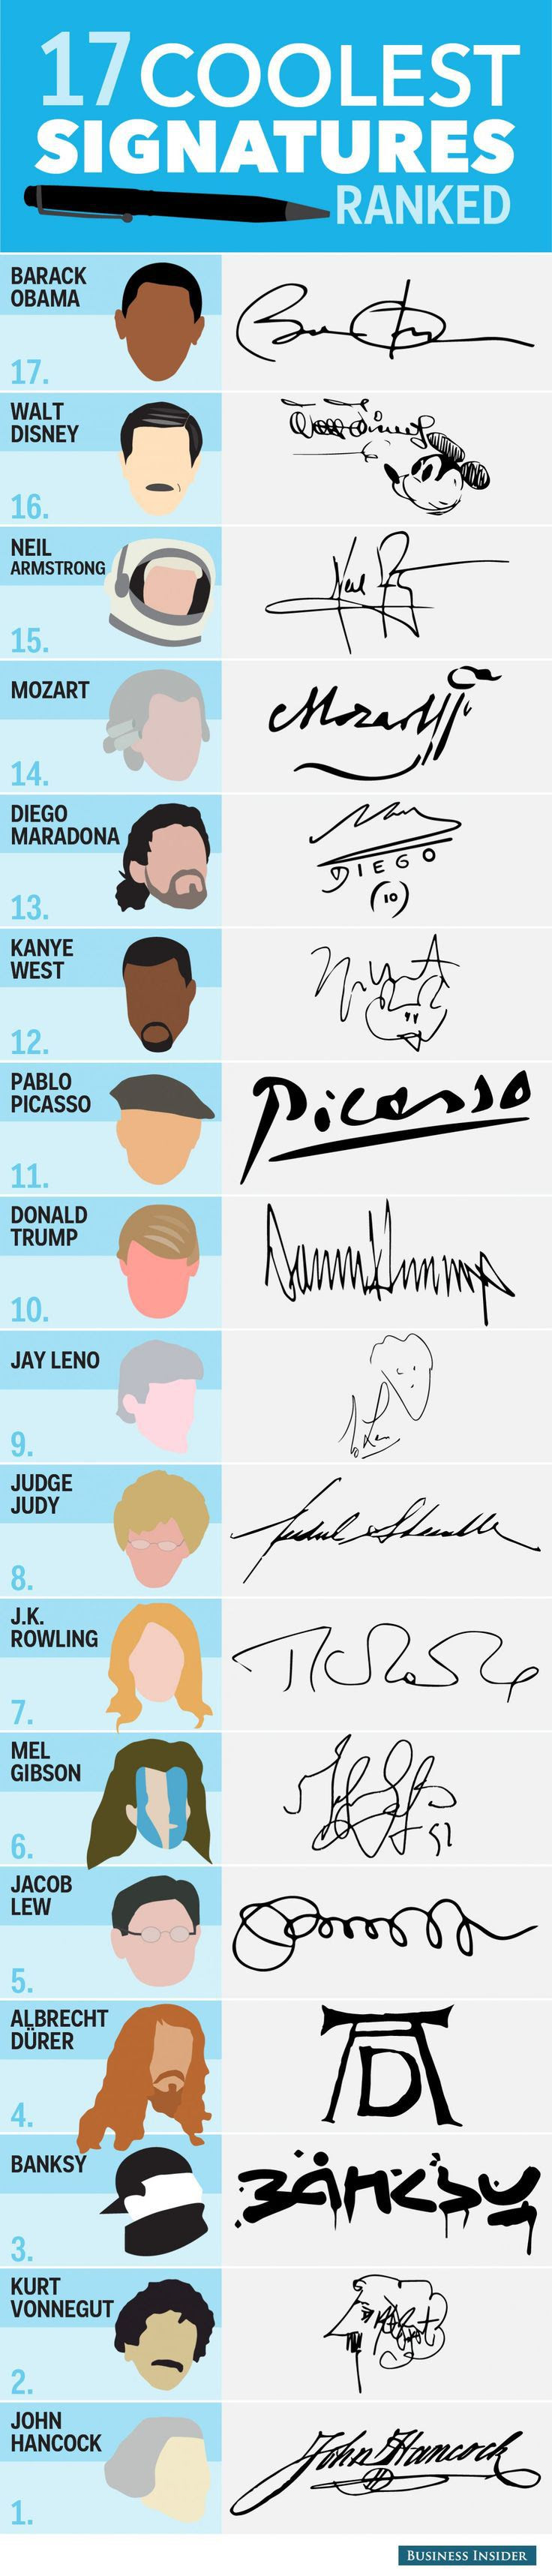  From http://www.businessinsider.sg/the-coolest-signatures-in-history-2014-6/#.Vdqz9tOqqko 